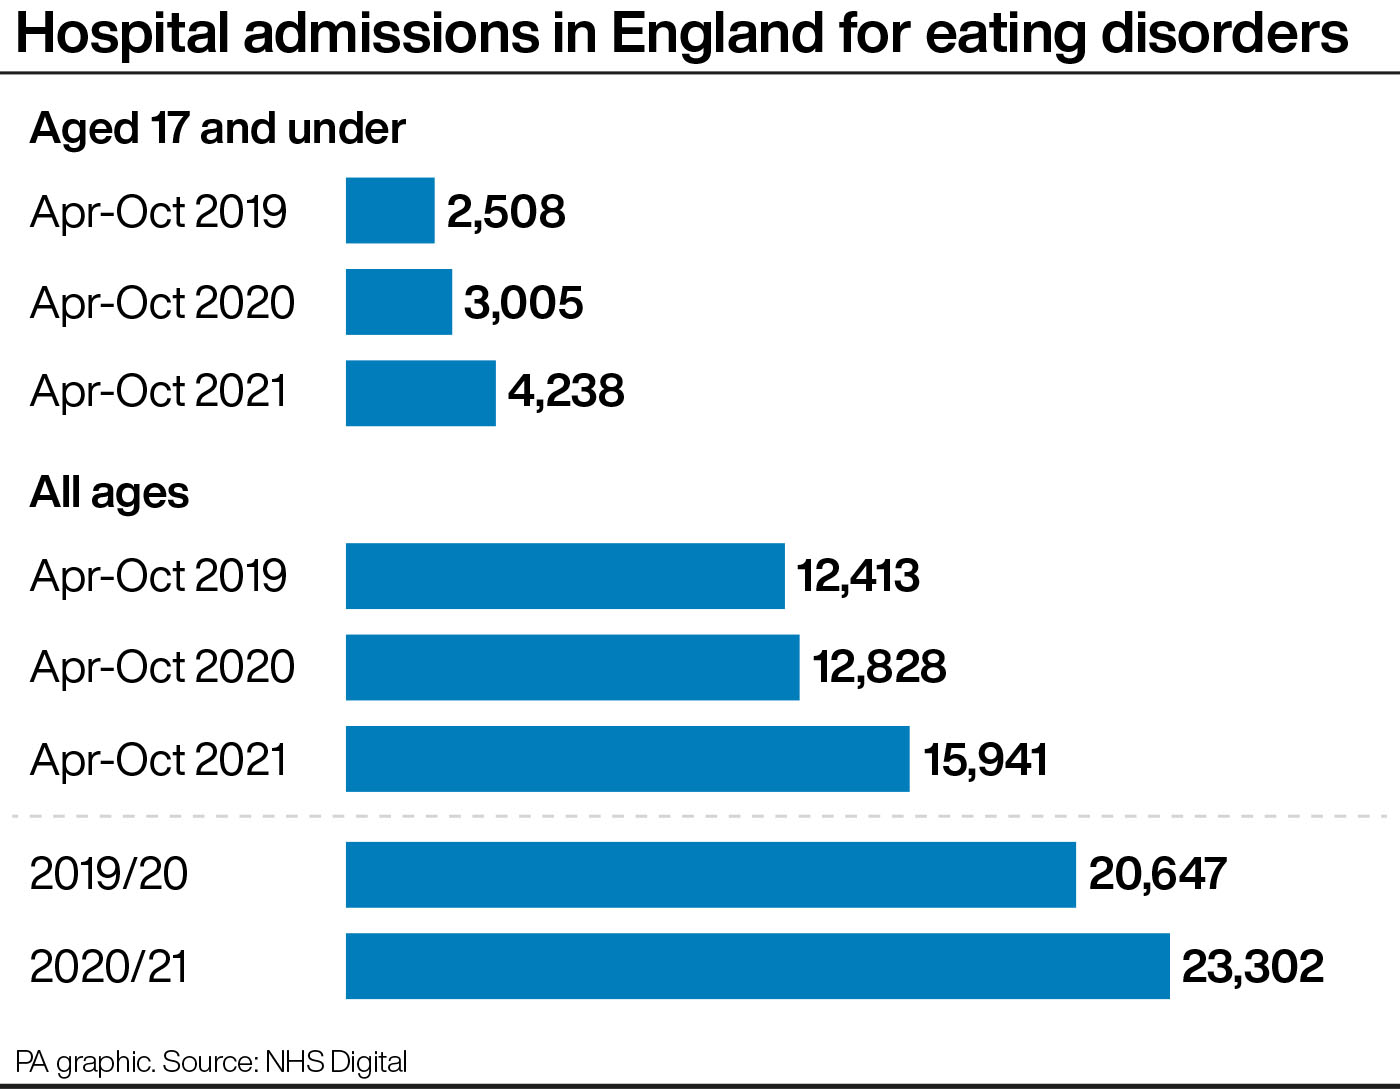 Hospital admissions for eating disorders